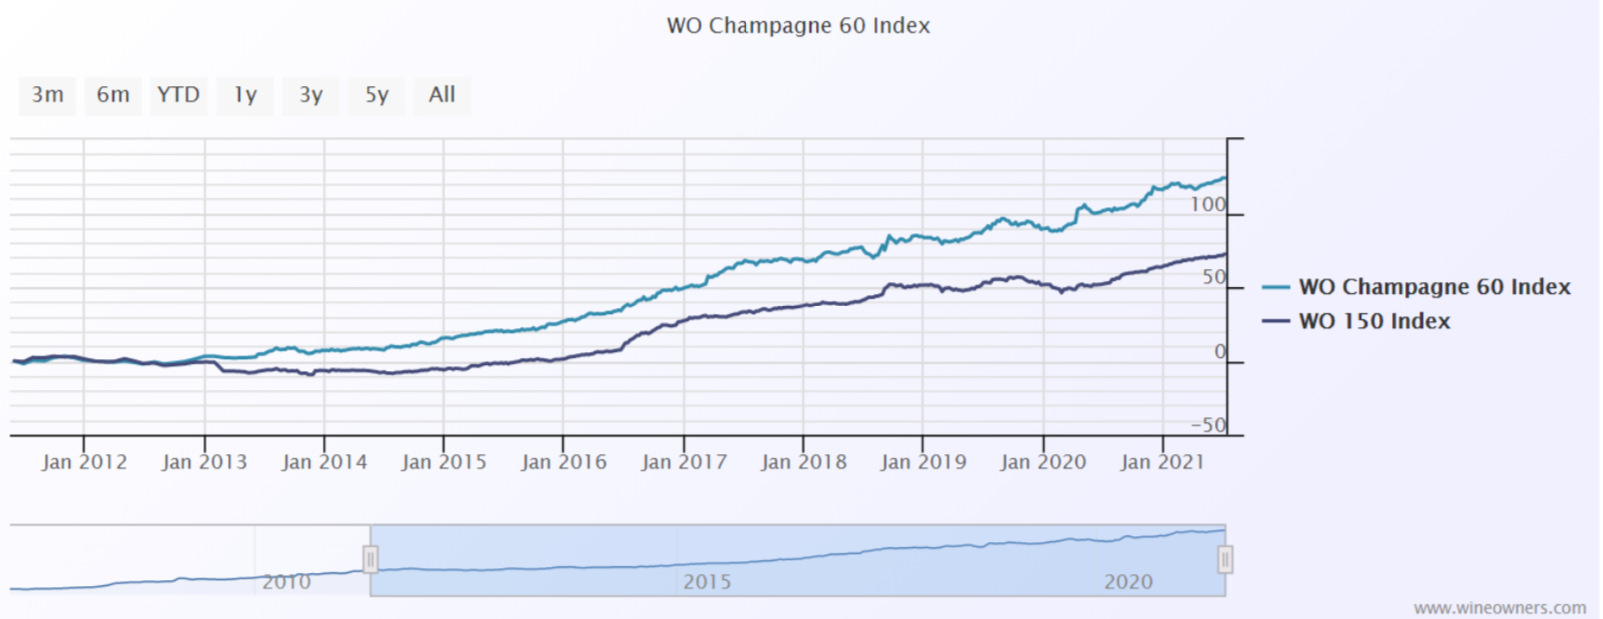 WO Champagne 60 Index 